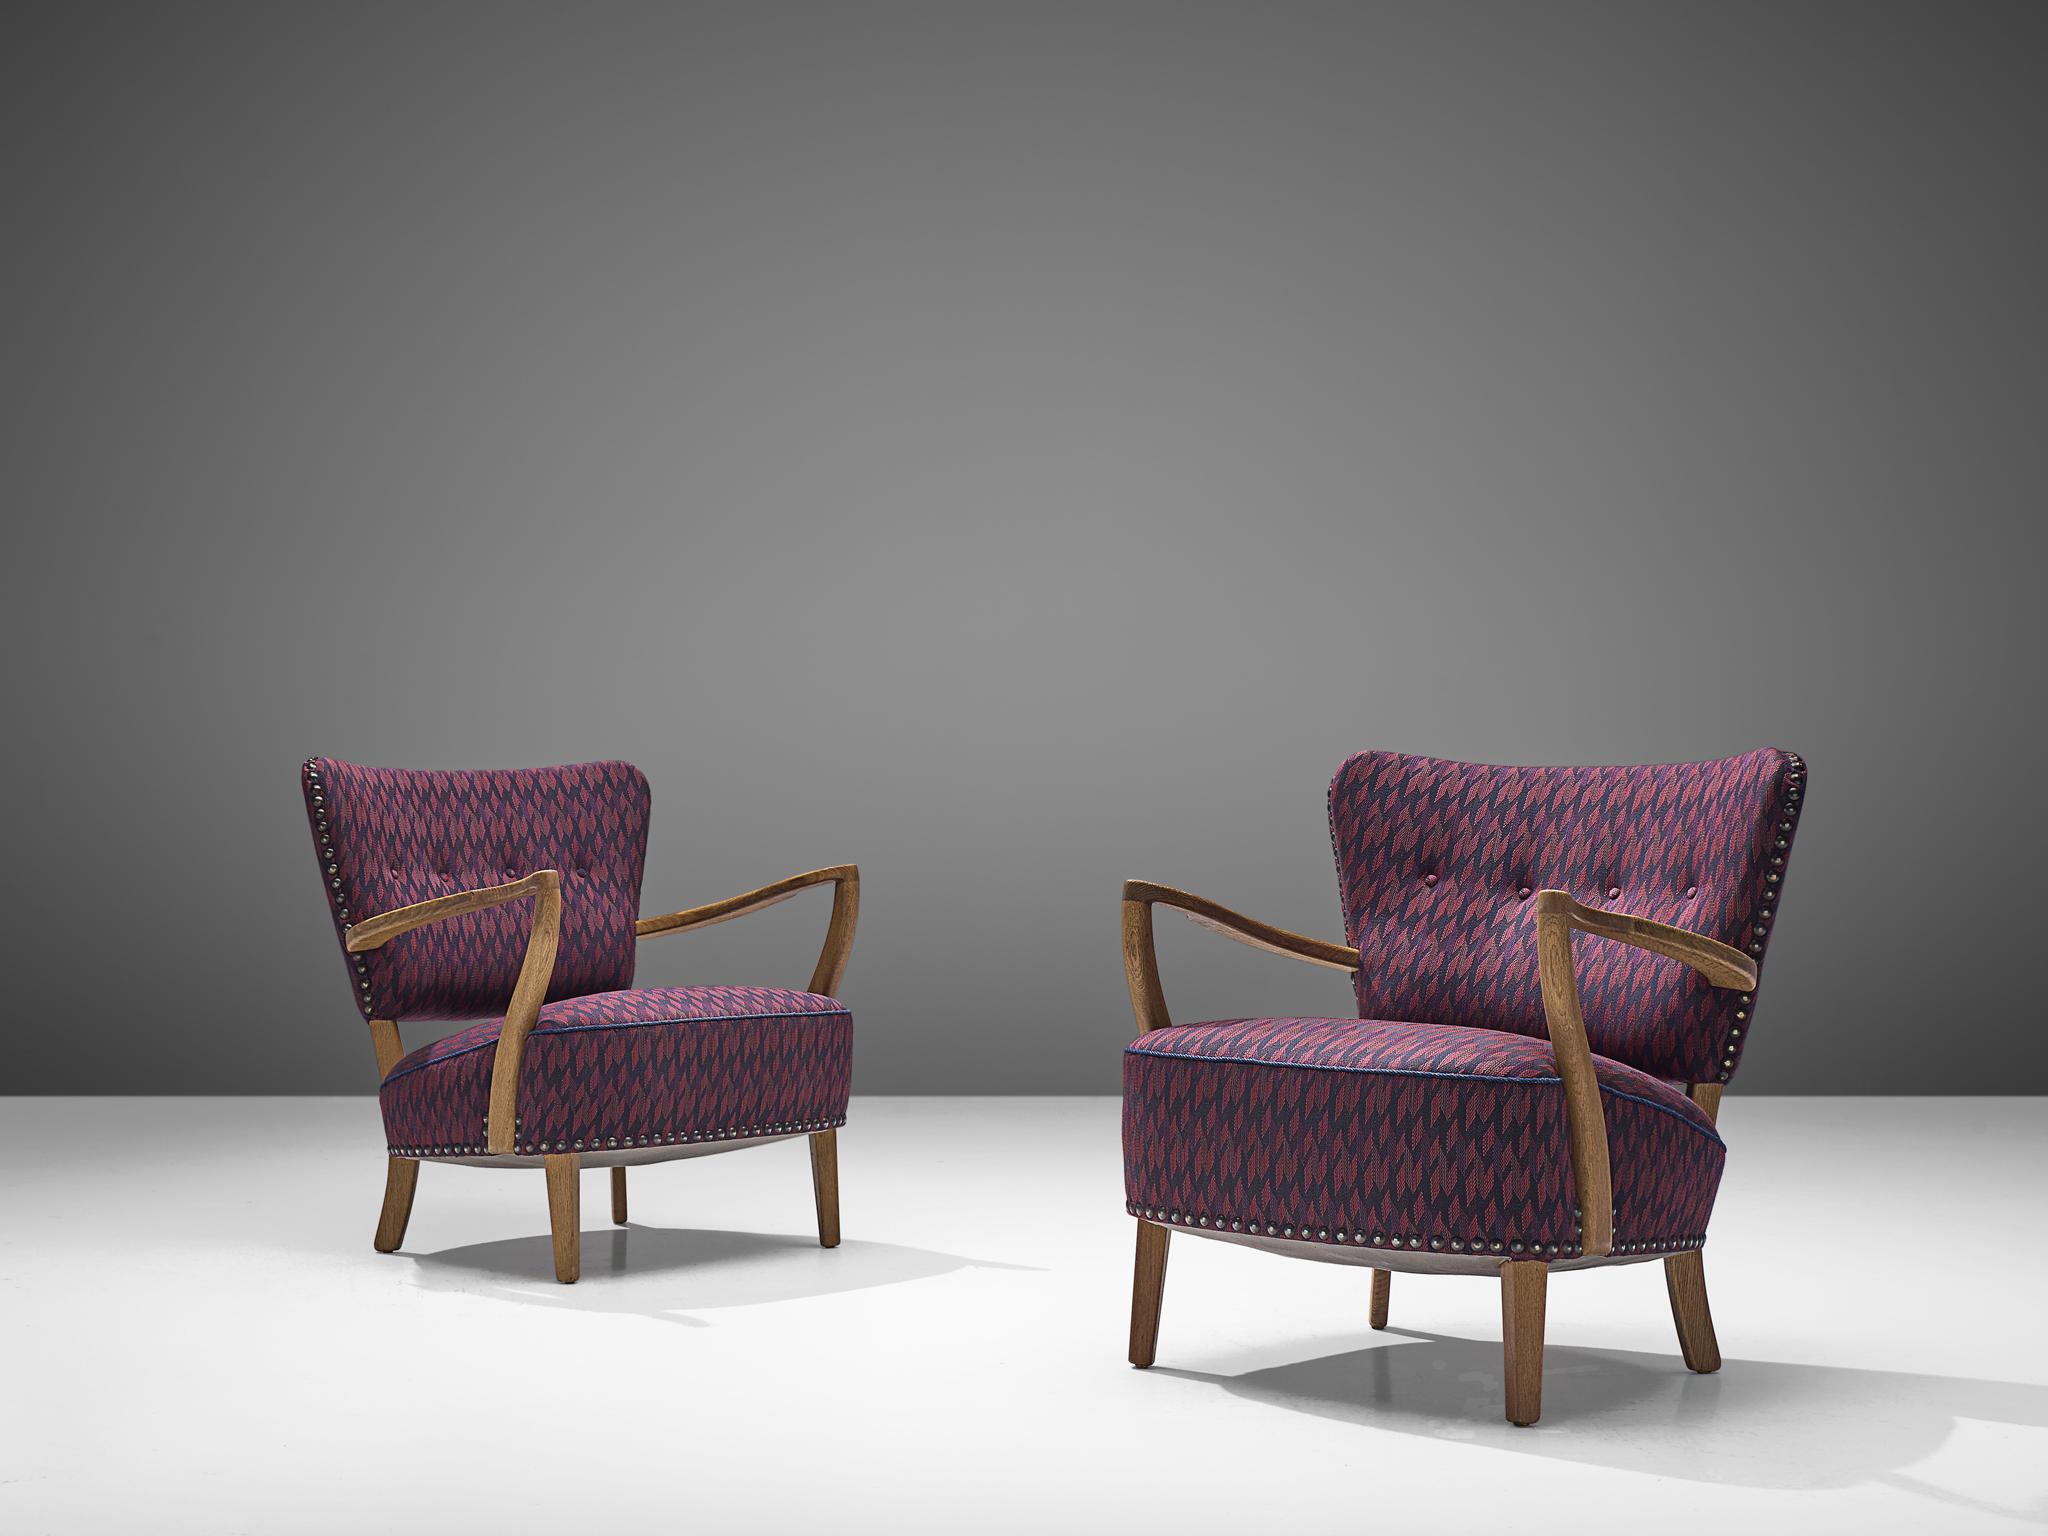 Pair of armchairs, fabric and oak, Denmark, 1940s

The most distinctive feature of these Danish lounge chairs are the curved, stained oak armrests. The backrest and seat are distinguised from each other, creating a more airy look. The seat is wide